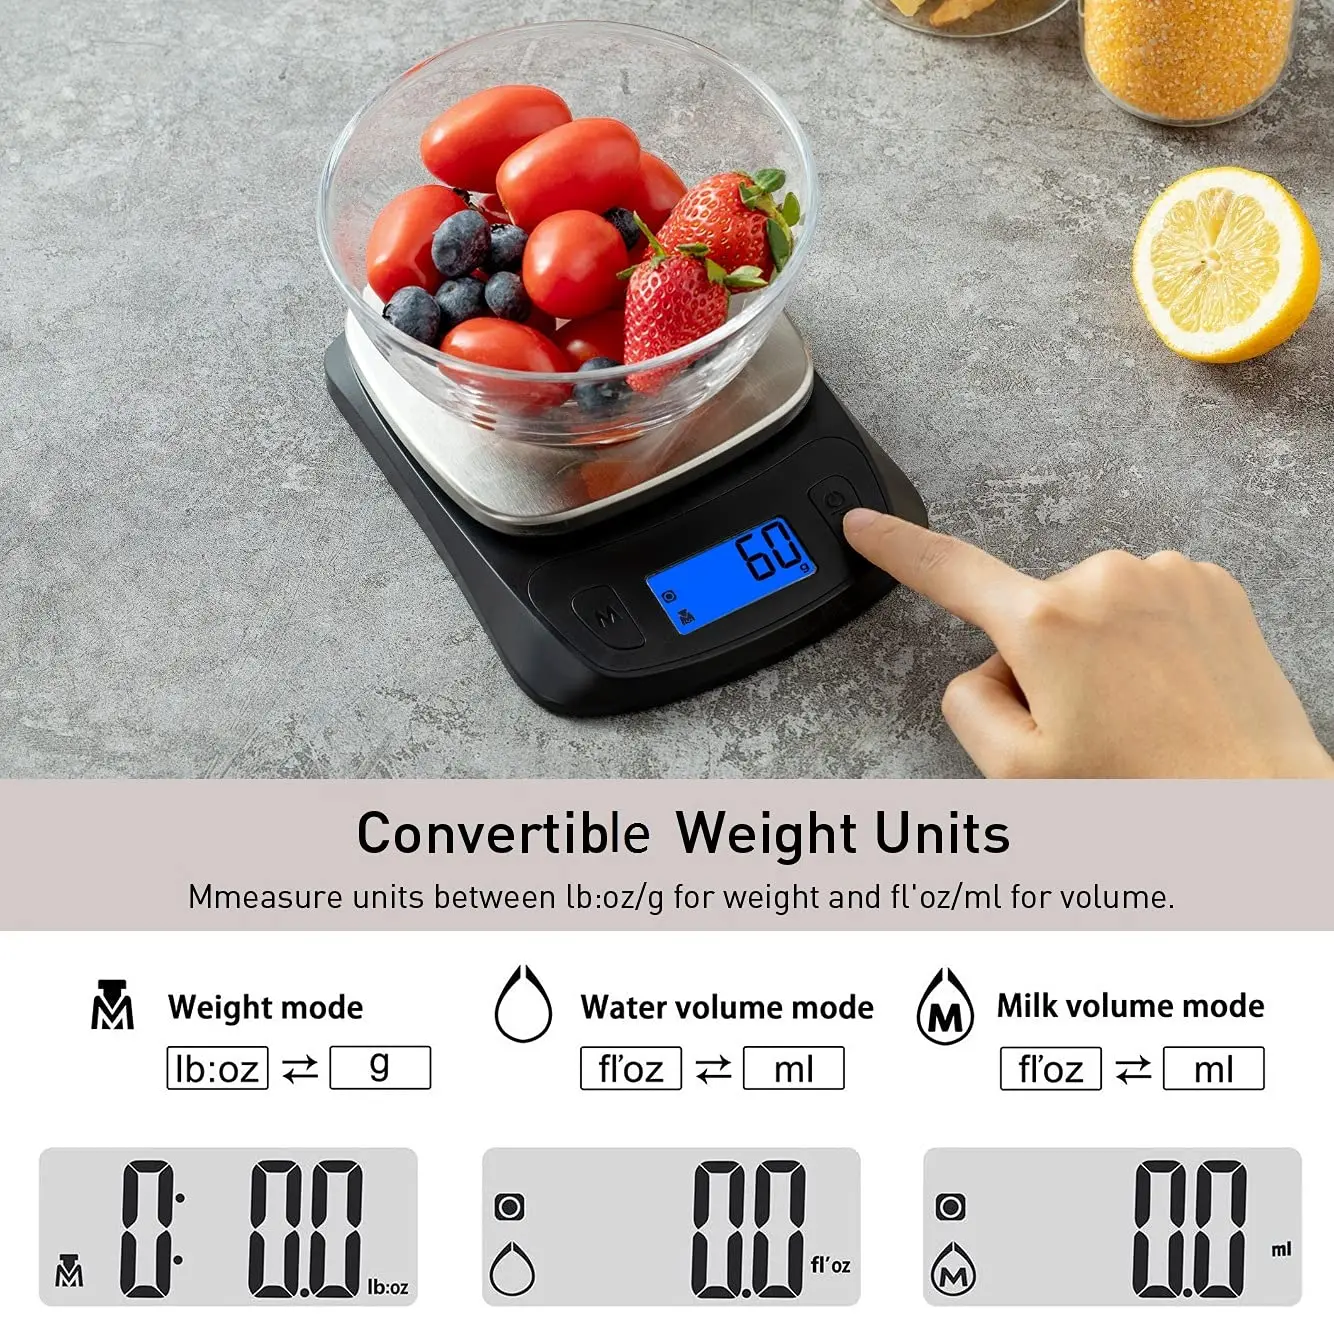 https://ae01.alicdn.com/kf/Af81d940be0e749ca90d6c7eb4ca93dfec/Ultra-Slim-Kitchen-Scale-Digital-Food-Weight-Scale-for-Baking-Cooking-in-Grams-and-Ounces-Tare.jpg